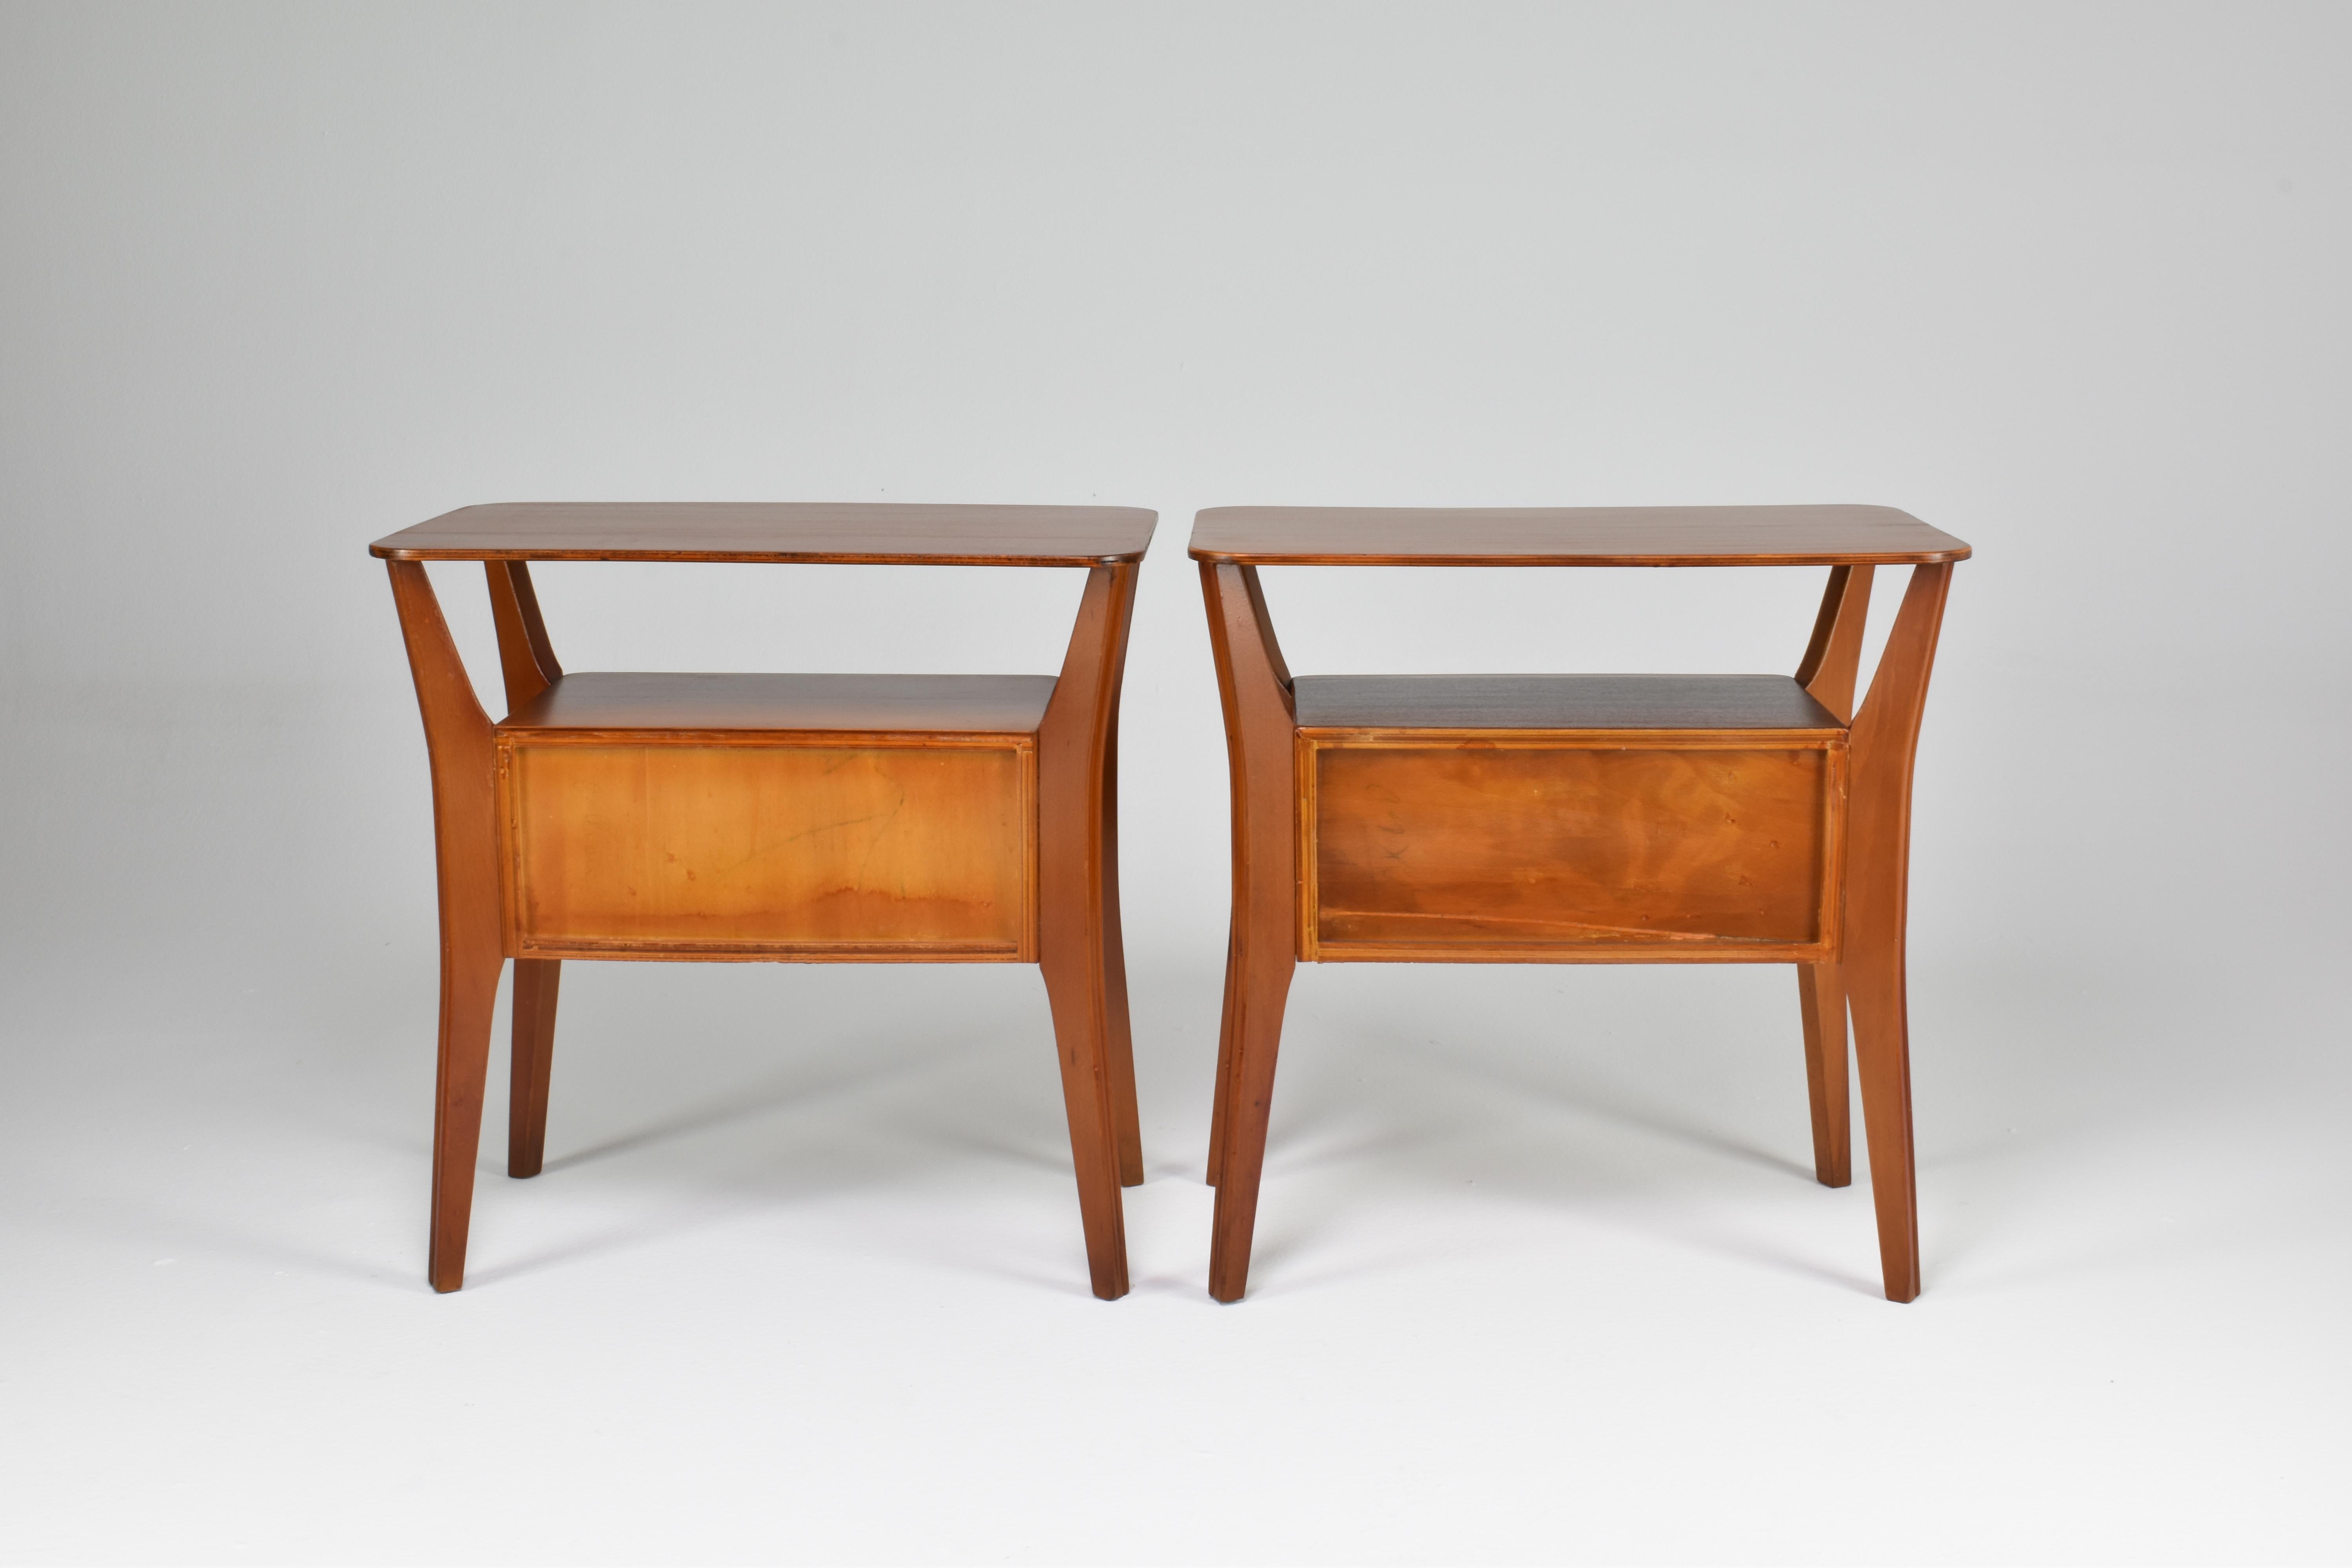 Brass Pair of Italian Maple Nightstands Attributed to Gio Ponti for Cantu, 1950s For Sale